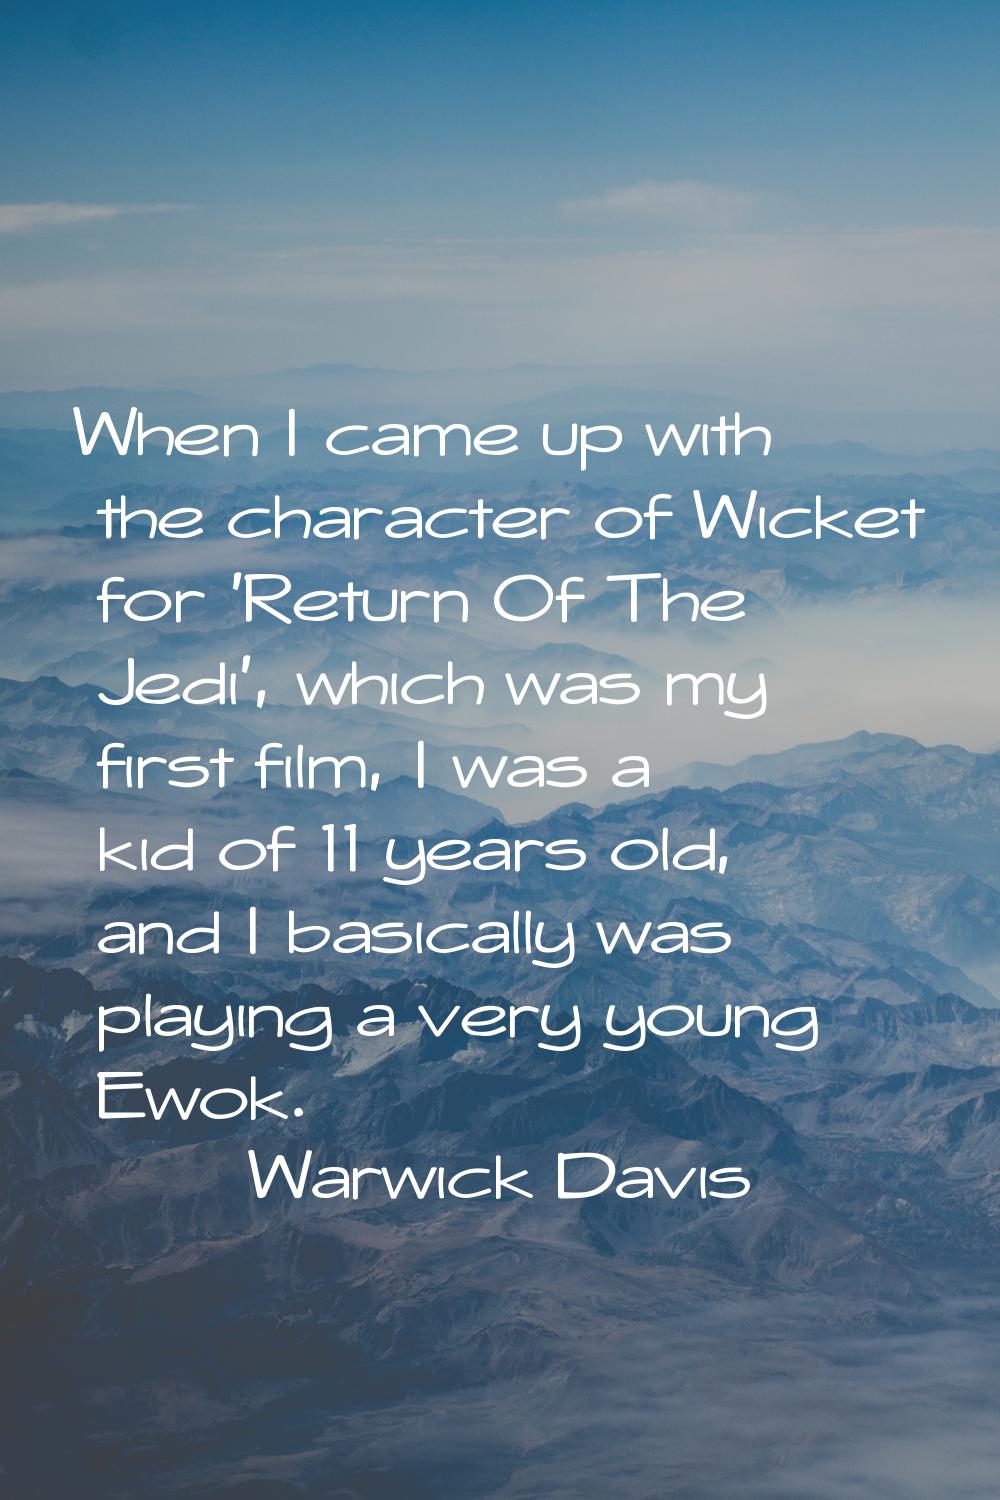 When I came up with the character of Wicket for 'Return Of The Jedi', which was my first film, I wa